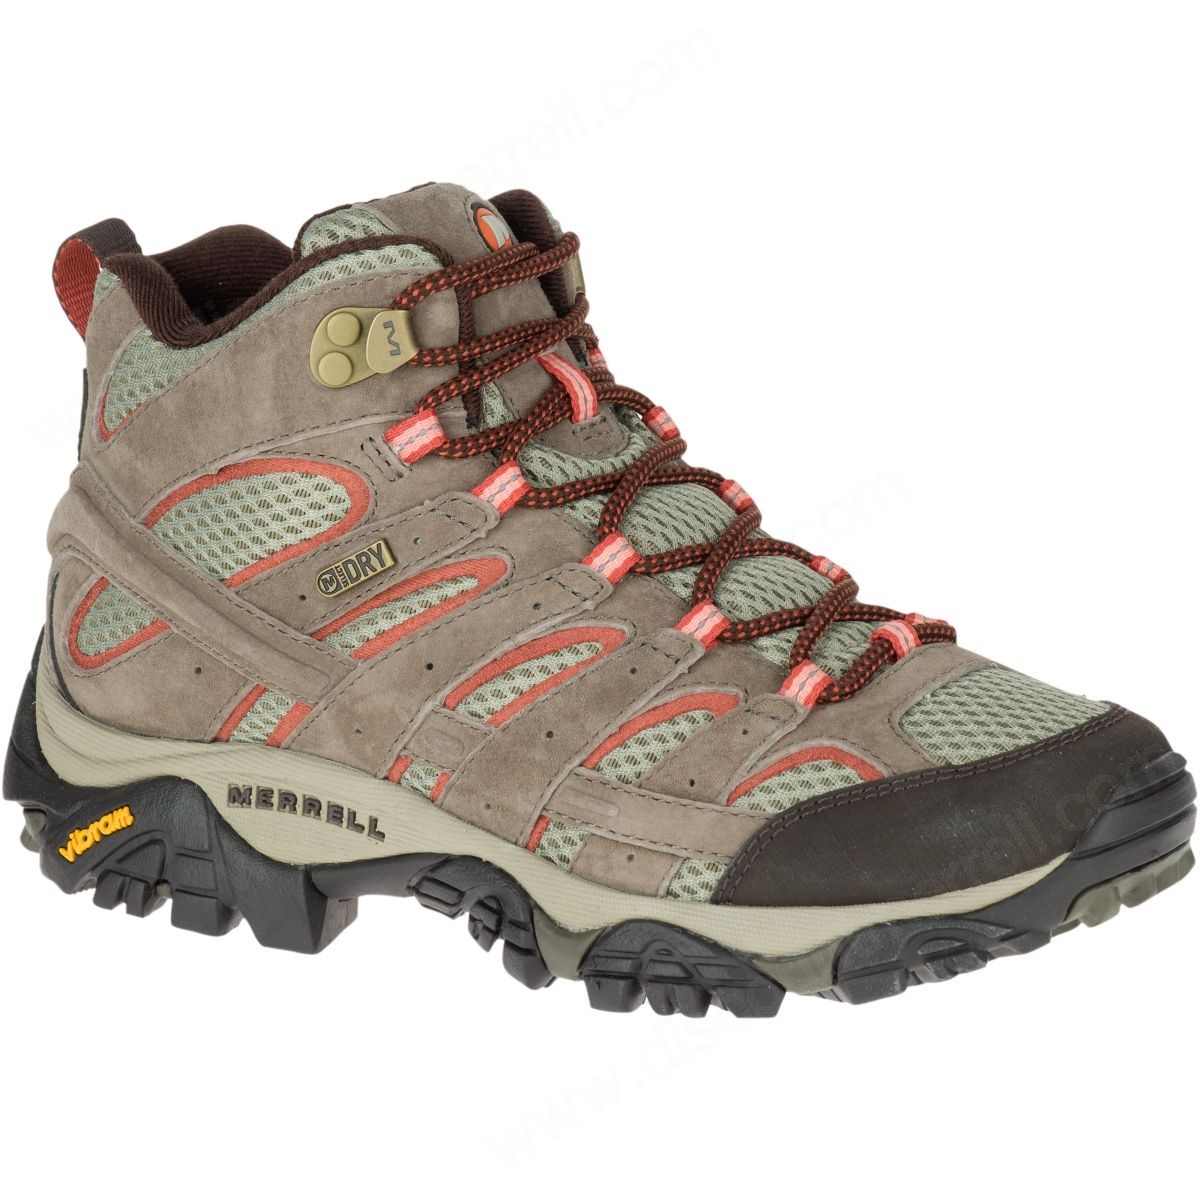 Merrell Lady's Moab Mother Of All Boots™ Mid Waterproof Wide Width Bungee Cord - Merrell Lady's Moab Mother Of All Boots™ Mid Waterproof Wide Width Bungee Cord